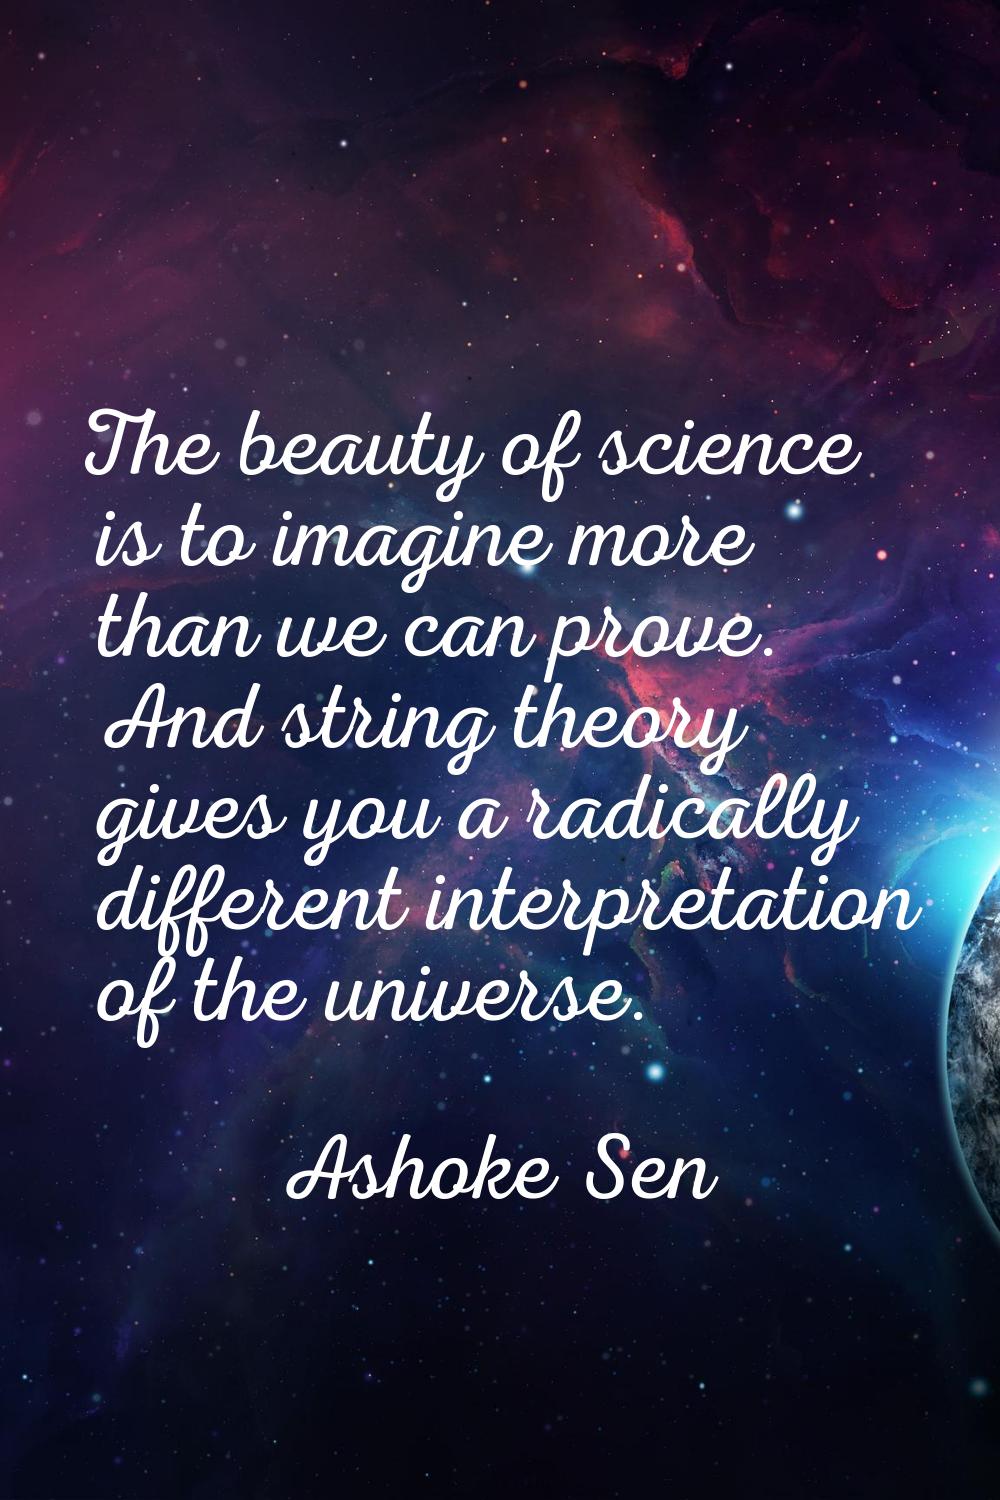 The beauty of science is to imagine more than we can prove. And string theory gives you a radically